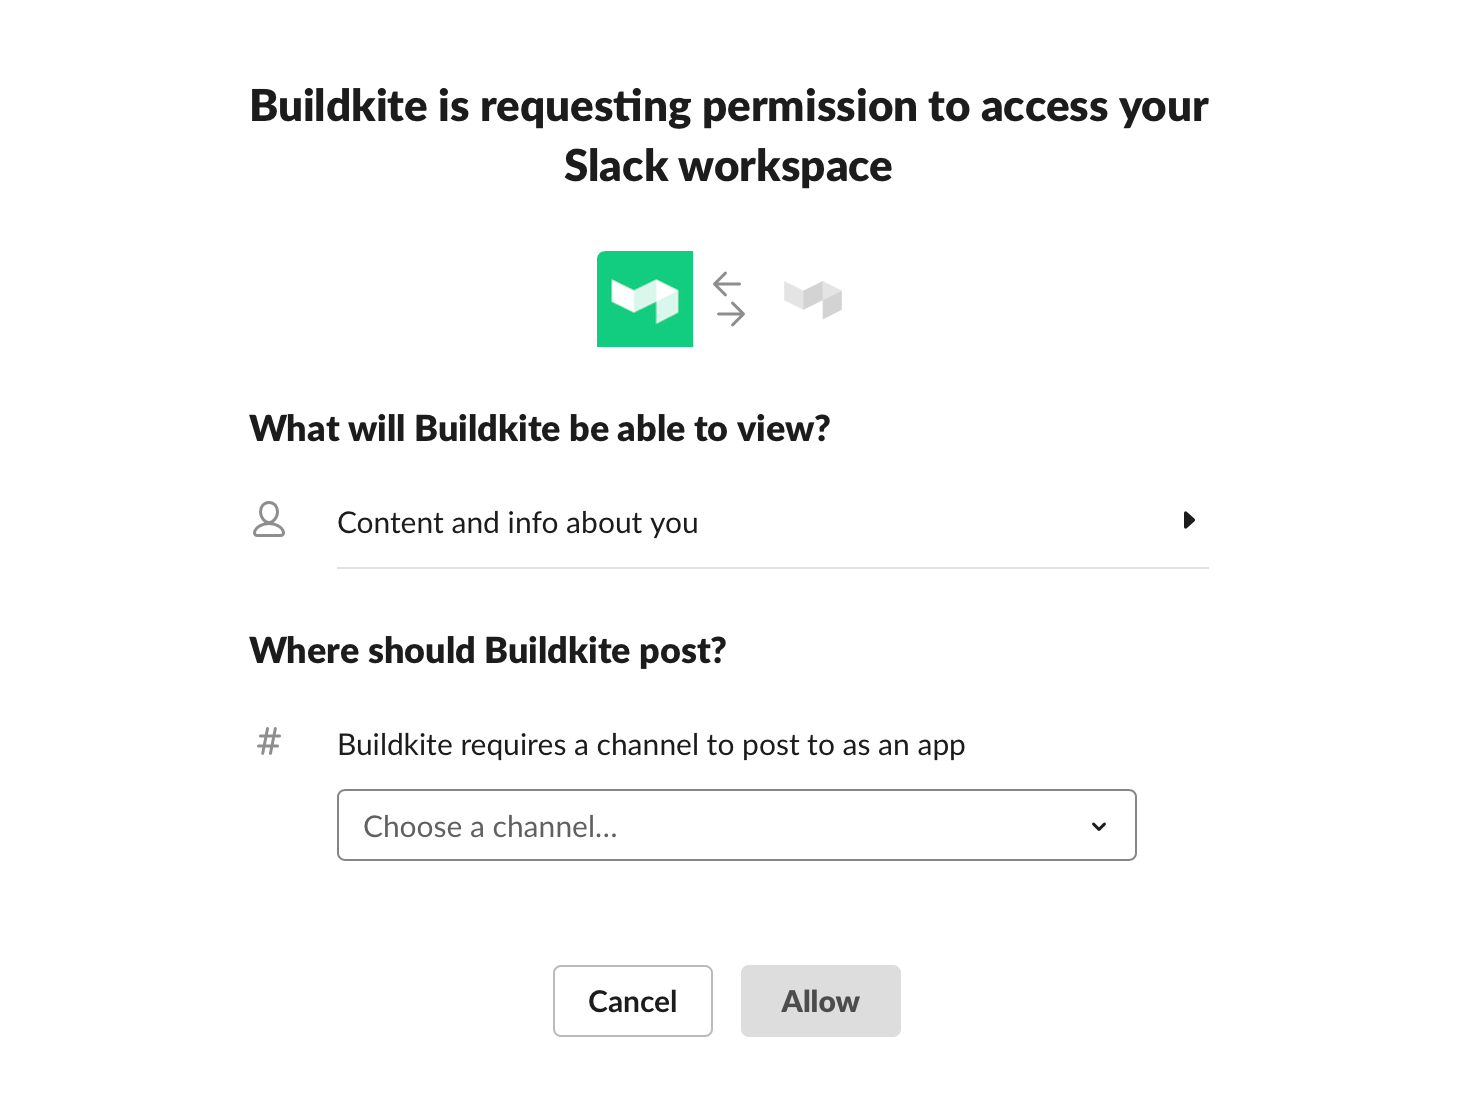 Screenshot of Slack's OAuth prompt, with Buildkite requesting access to your Slack workspace. It shows that Buildkite needs to know some information about you and your workspace, and asks you to choose a channel for Buildkite to post in.